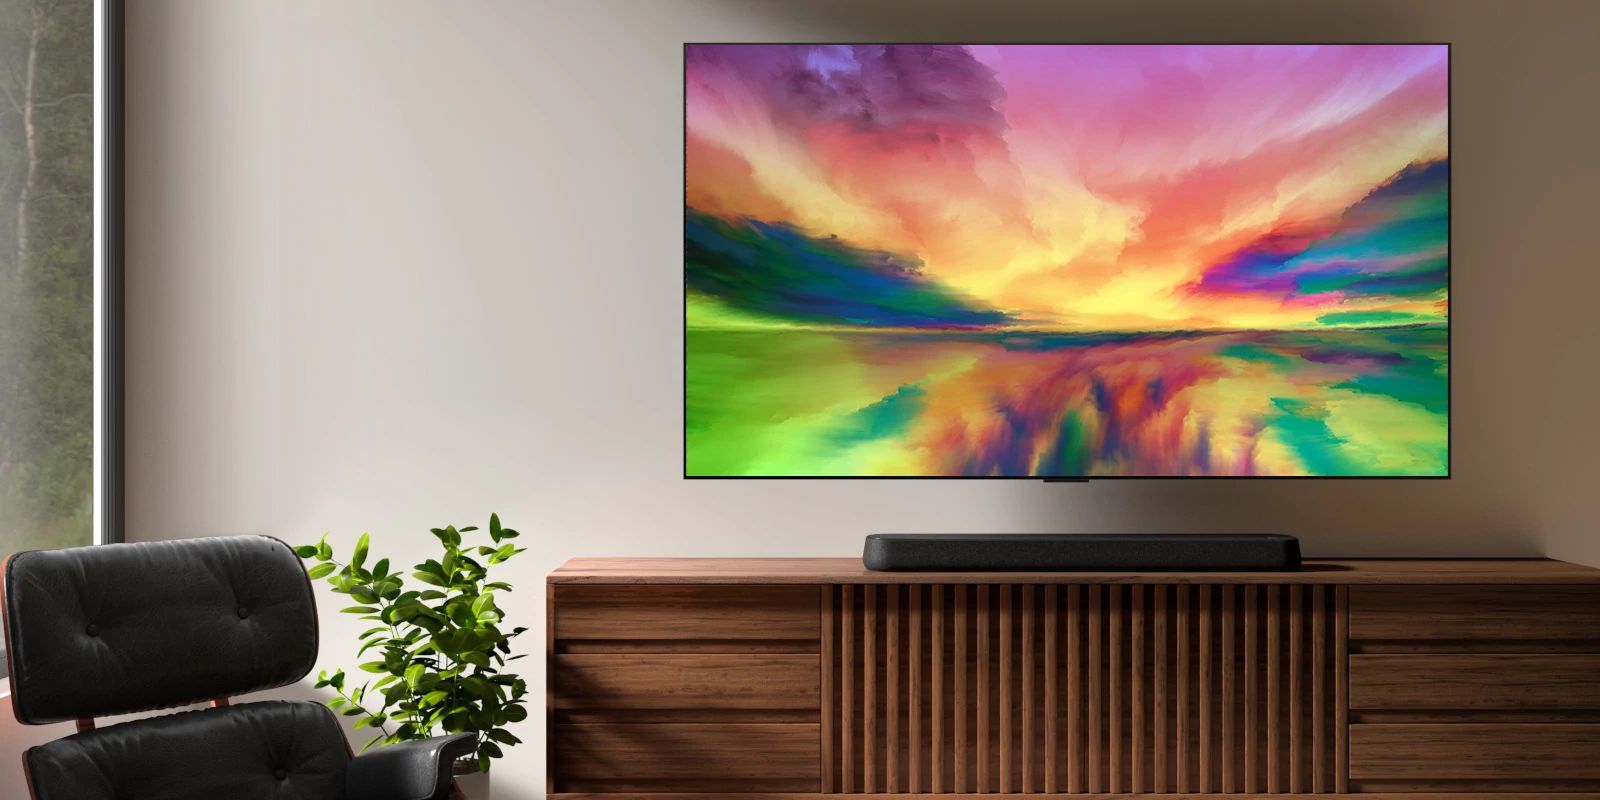 LG SE6 soundbar on wooden table under TV showing colorful abstract image